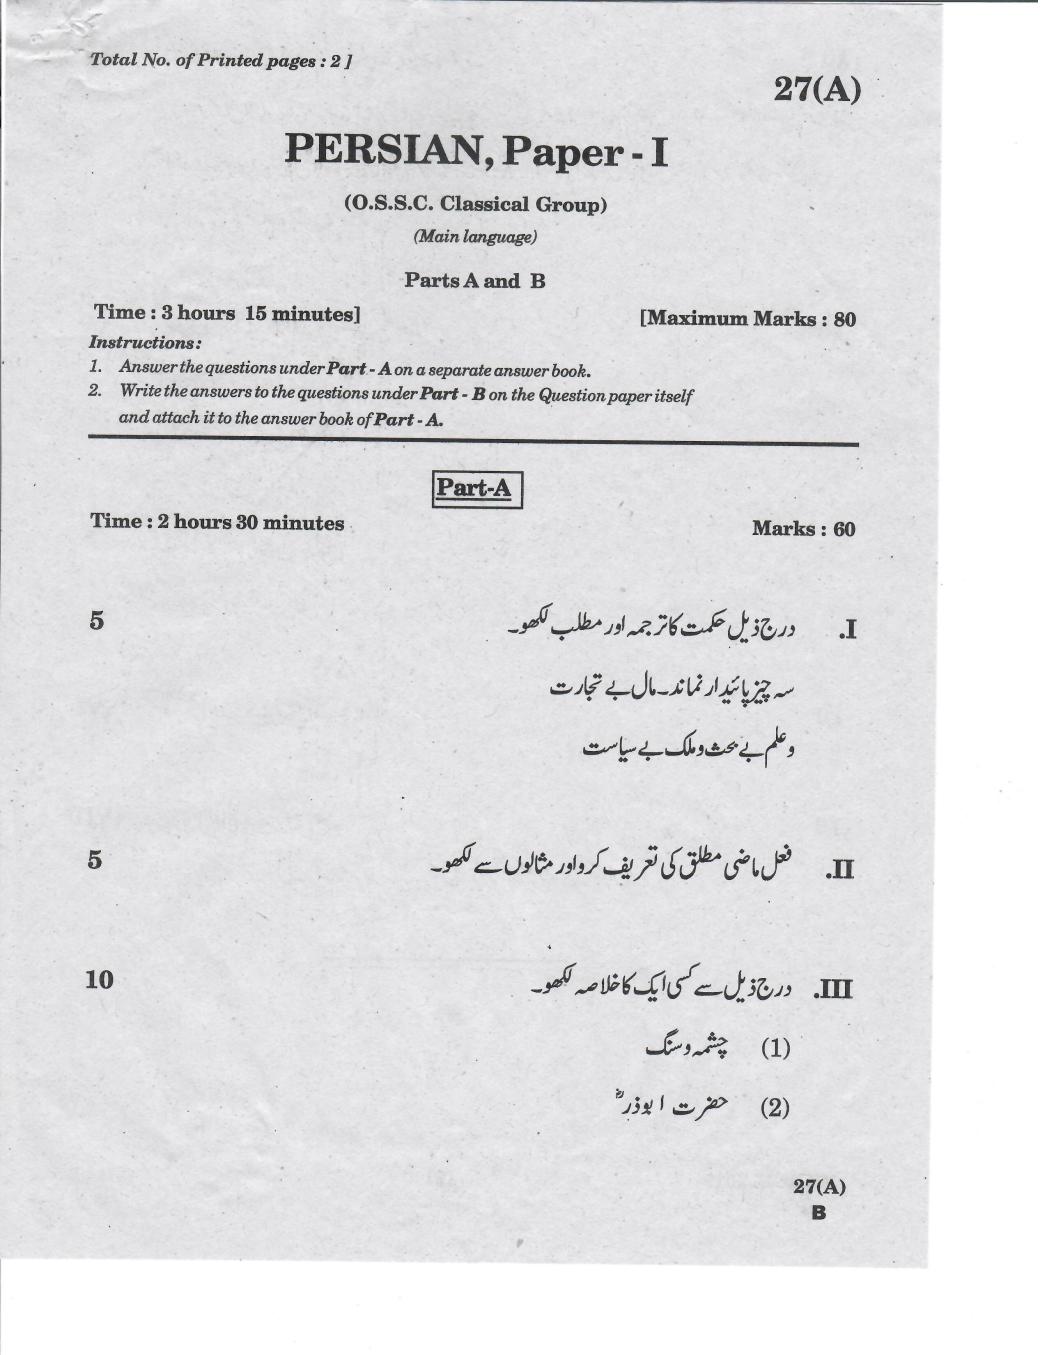 AP 10th Class Question Paper 2019 Persian - Paper 1 (OSSC Classical Group) - Page 1